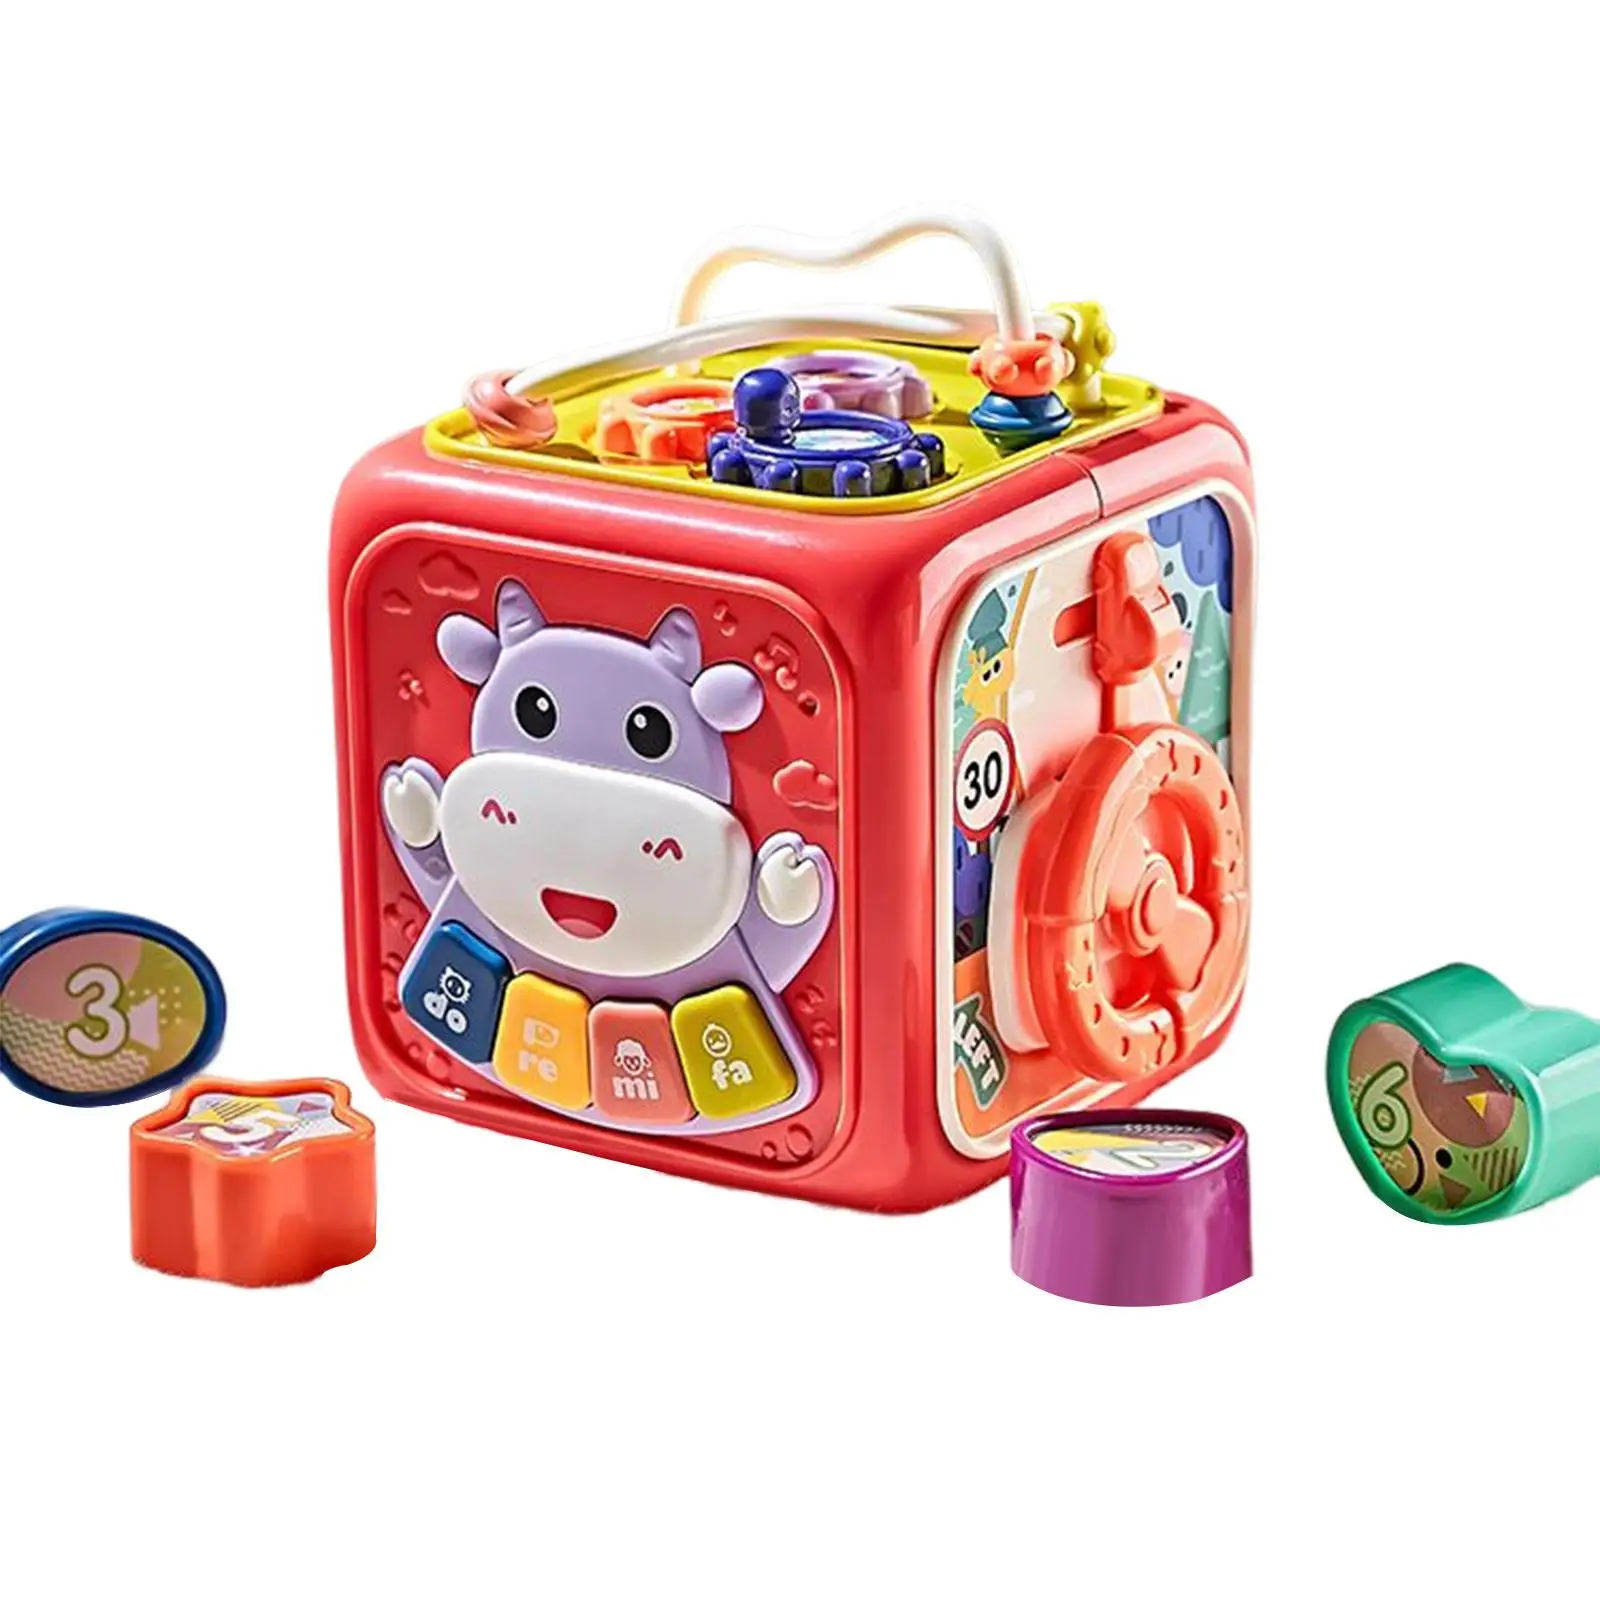 Baby Musical Baby Activity Cube Toy for Kids 6 Month Old Baby Toys Gift